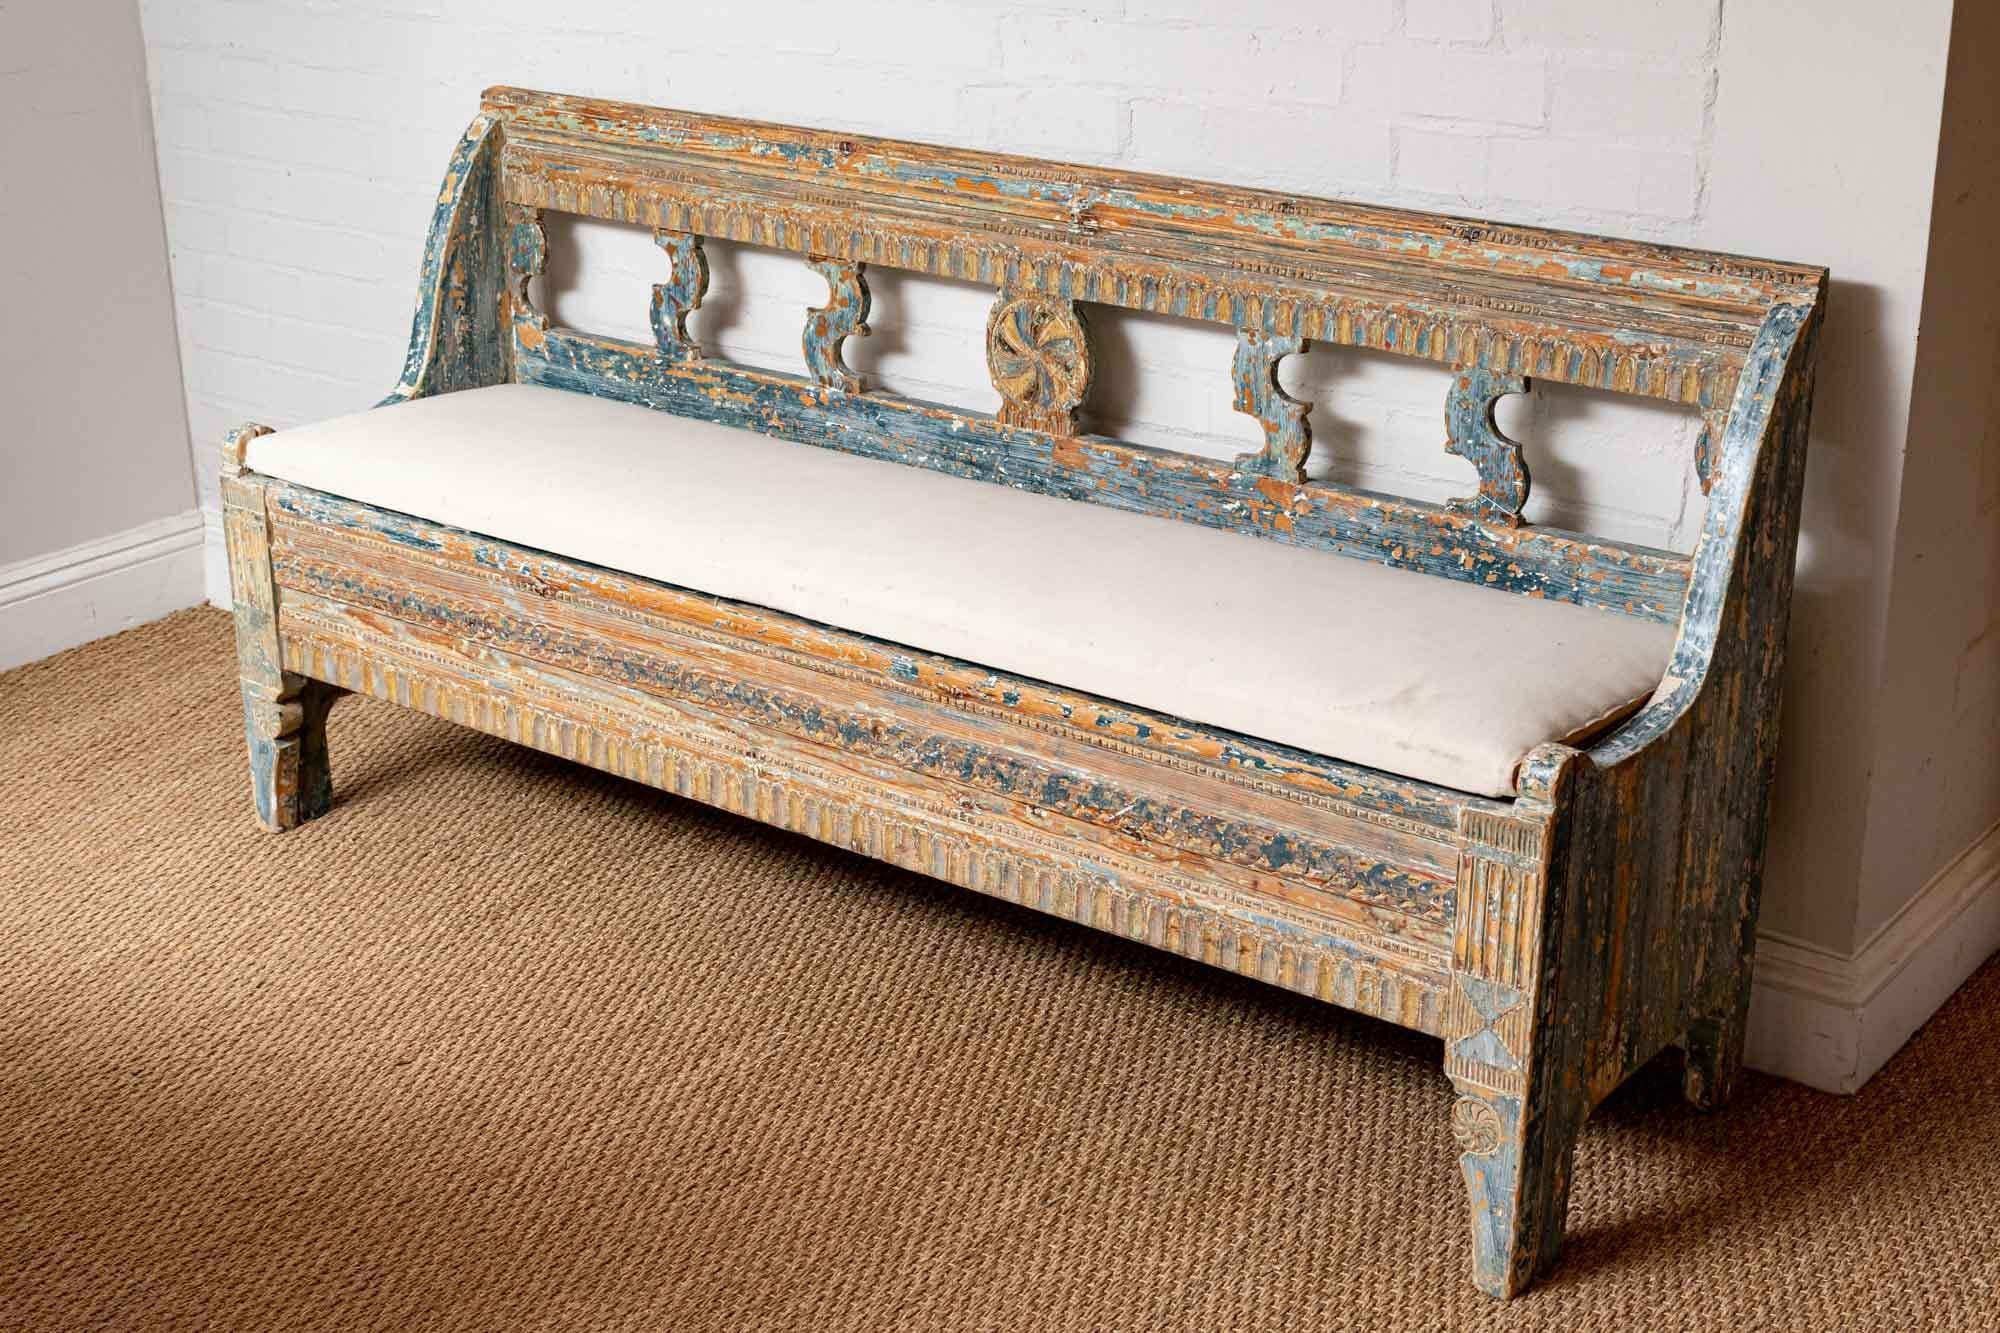 Late 18th century, highly decorative, solid Norwegian bench retaining most of its original paint in different shades of blue. The bench is hand carved to the front with decorative scroll detail at the back. It has a simply covered upholstered drop